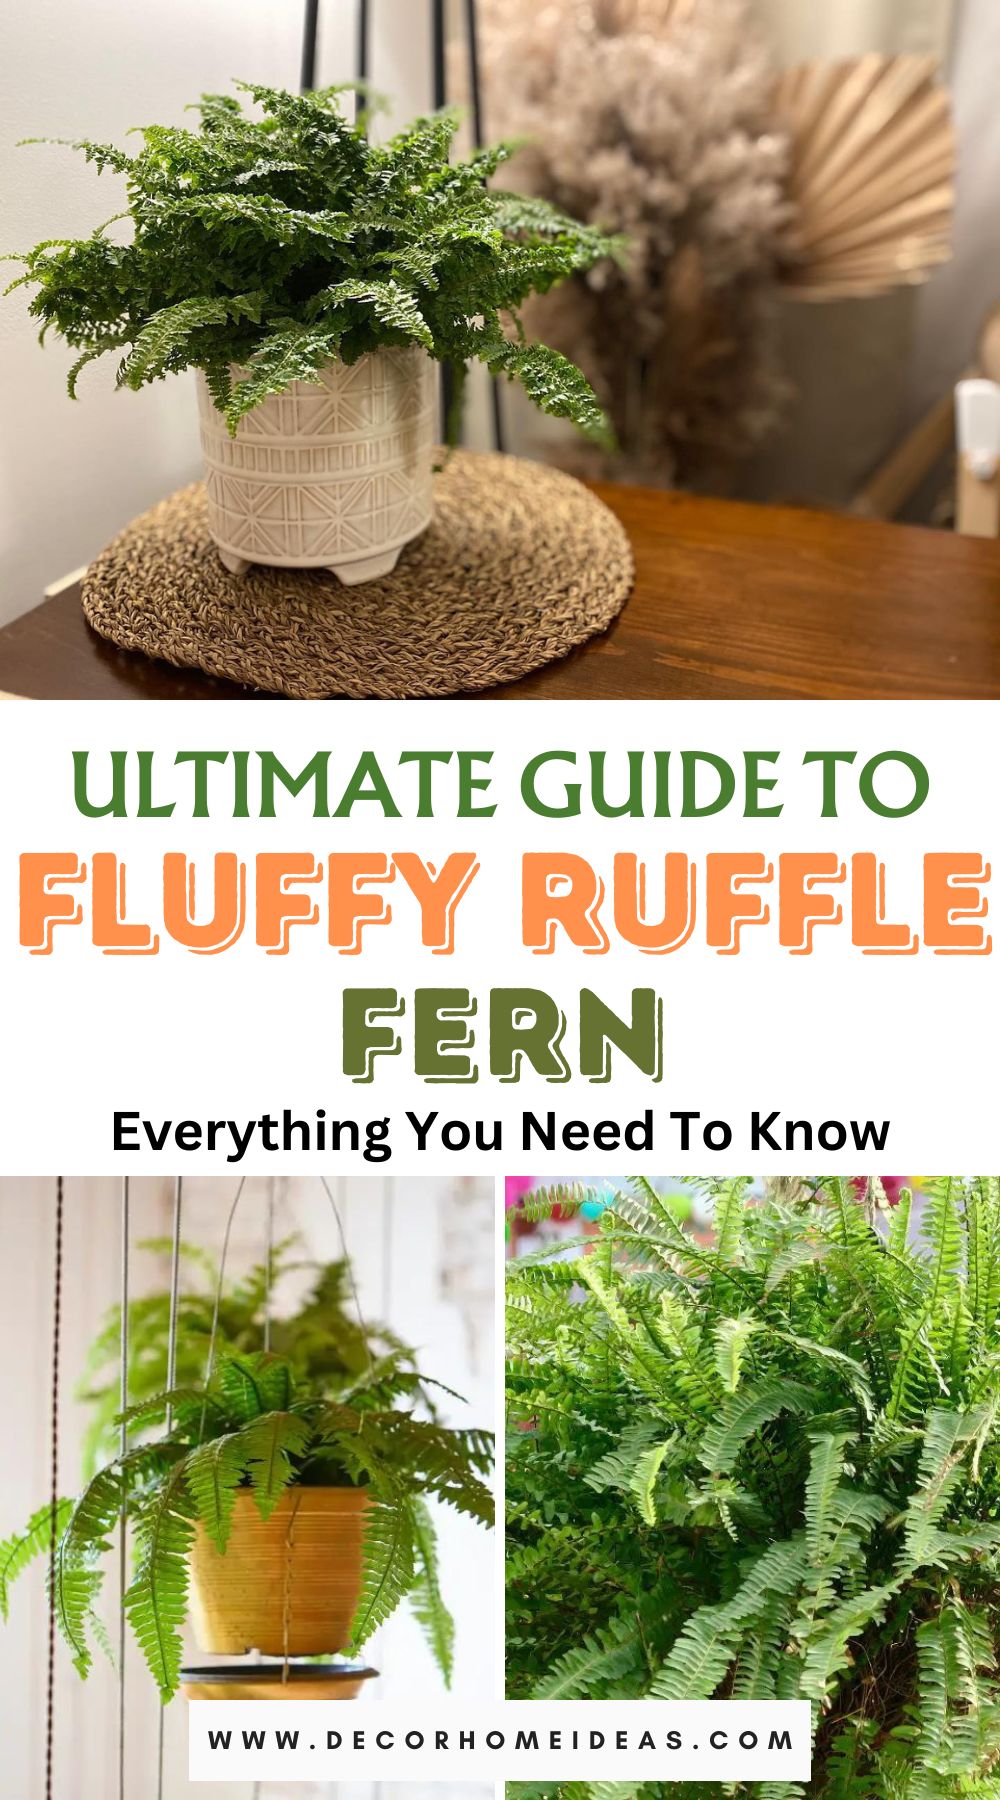 Dive into the lush world of Fluffy Ruffle Ferns with our comprehensive care guide, covering everything you need to know for nurturing these elegant plants. From lighting preferences to watering tips, unlock the secrets to ensure your Fluffy Ruffle Fern thrives in style.